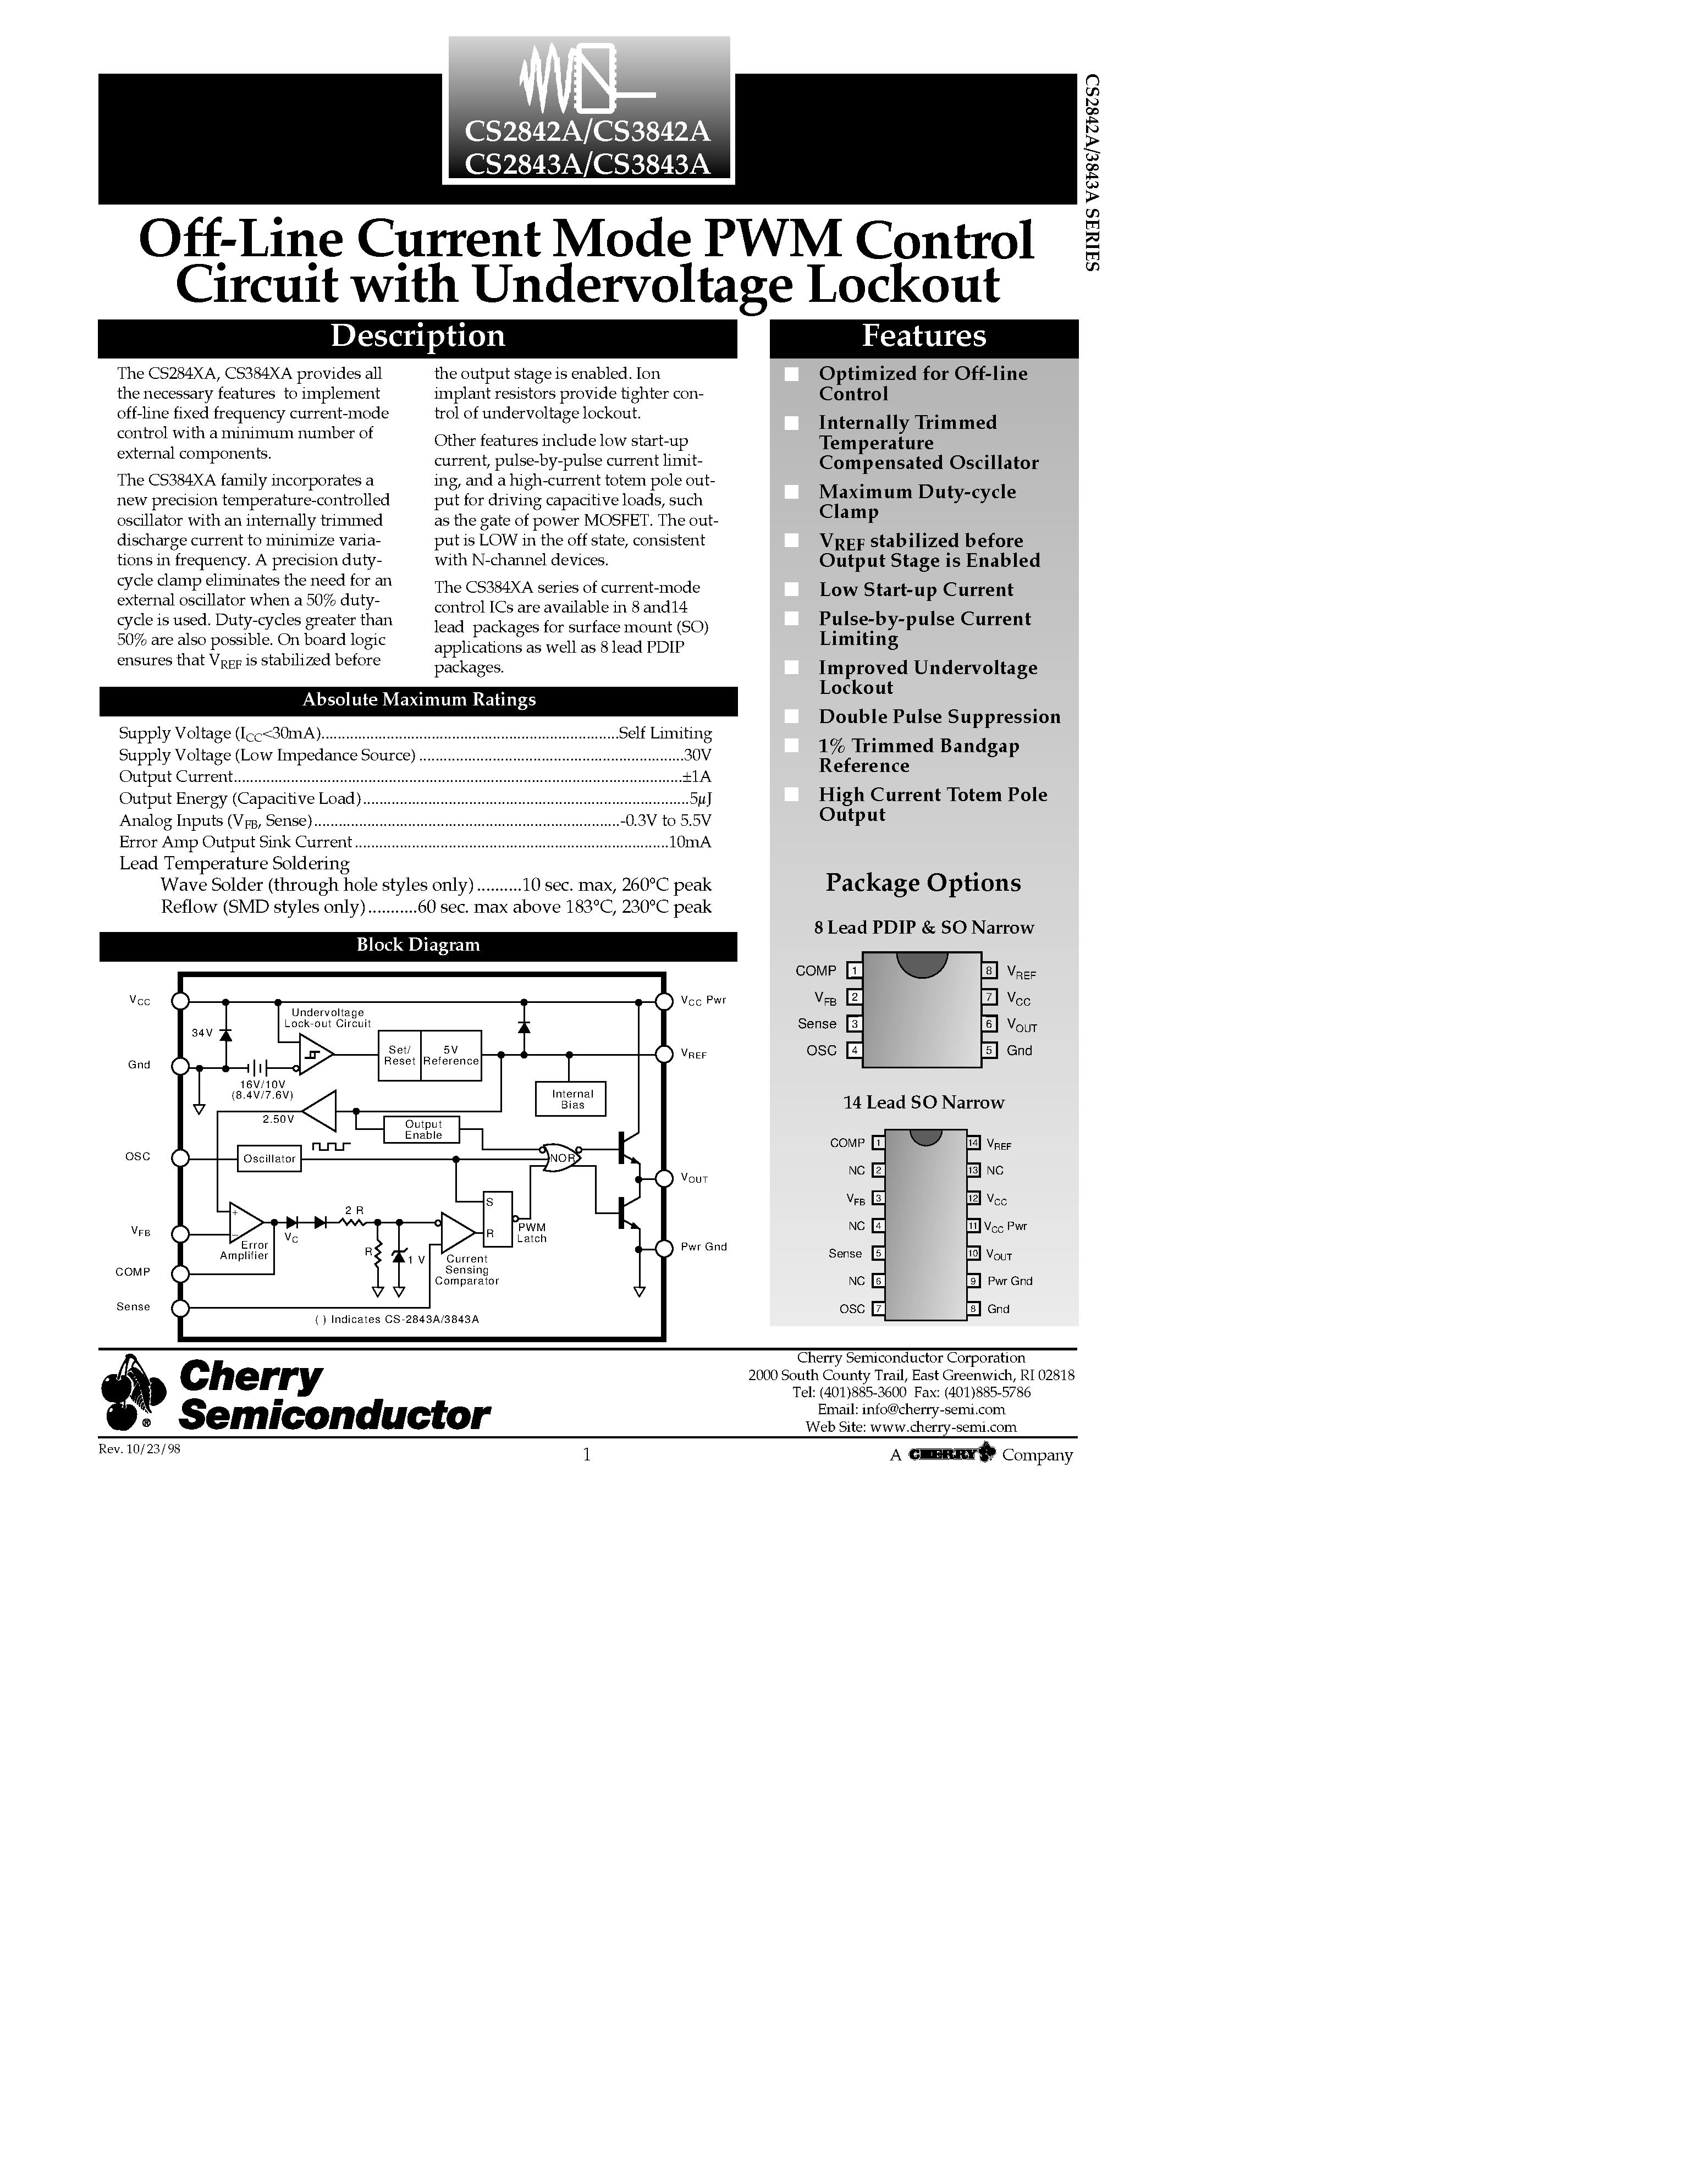 Datasheet CS2843A - Off-Line Current Mode PWM Control Circuit with Undervoltage Lockout page 1